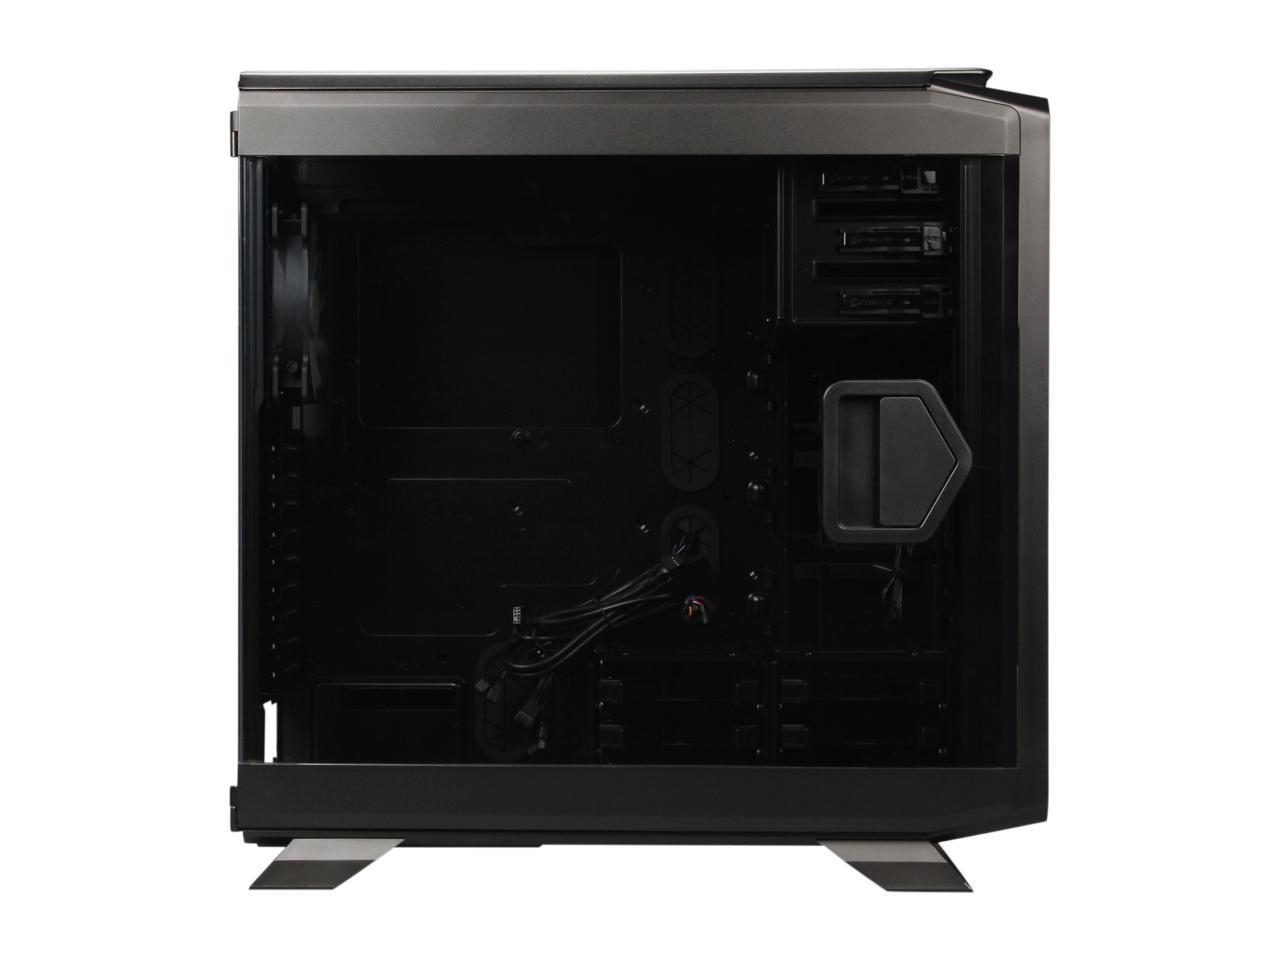 Corsair Graphite Series 760T Black Windowed Gaming Case with two 140mm